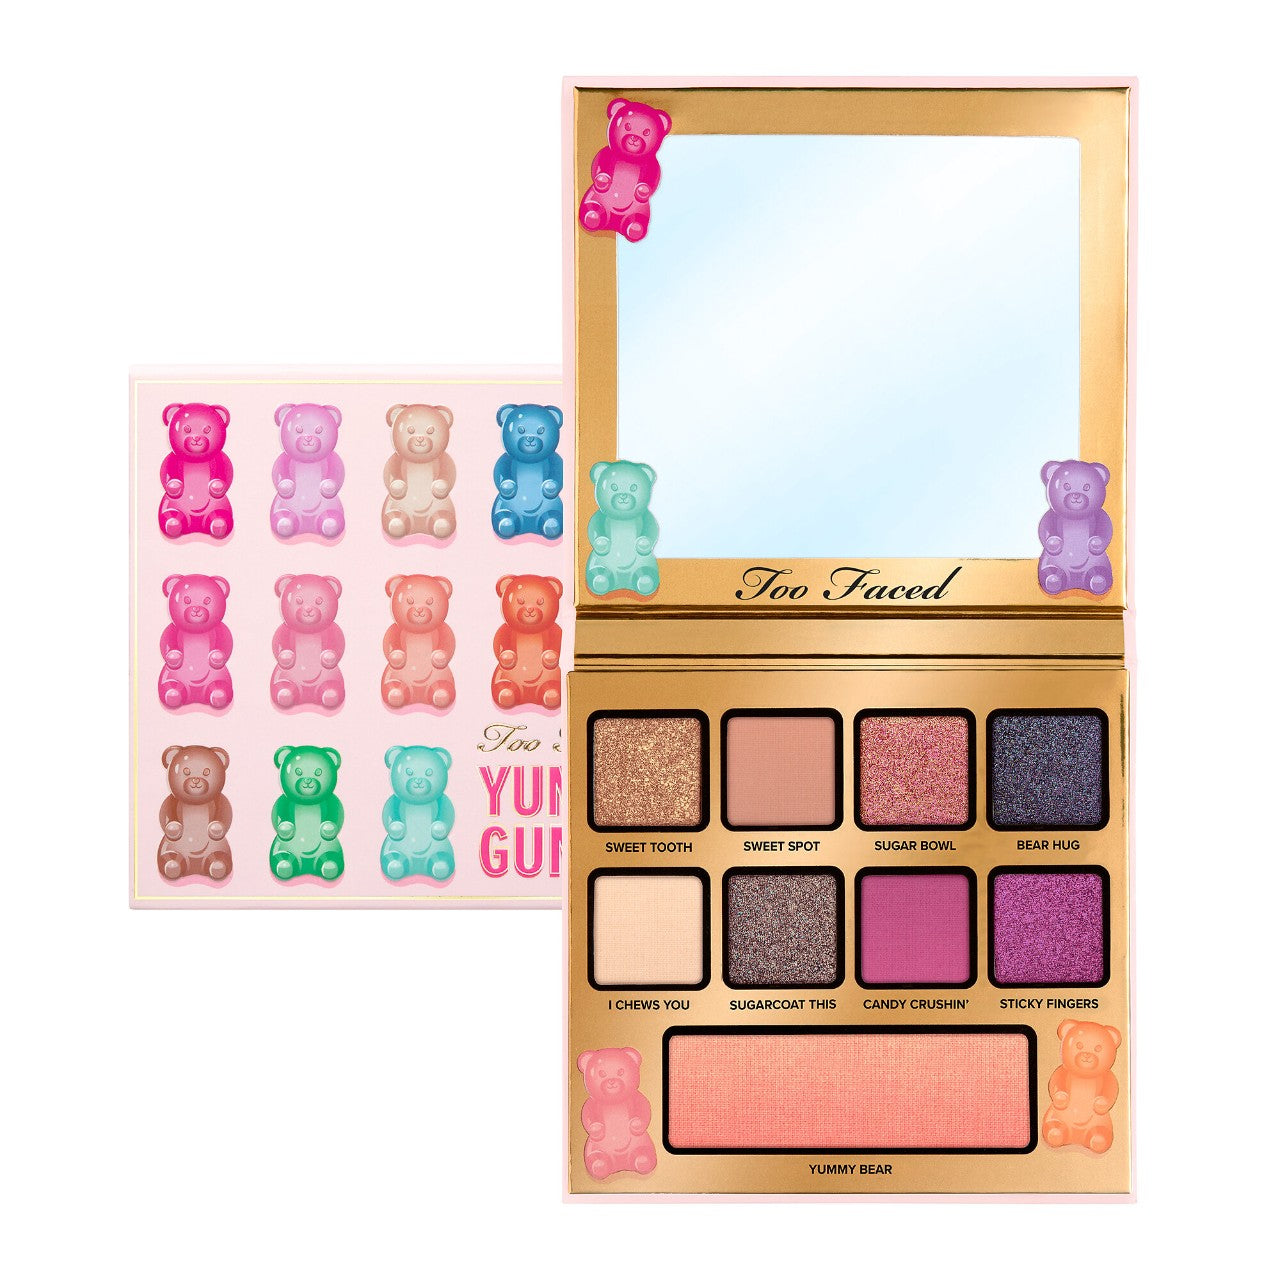 Too Faced - Yummy Gummy Makeup Set